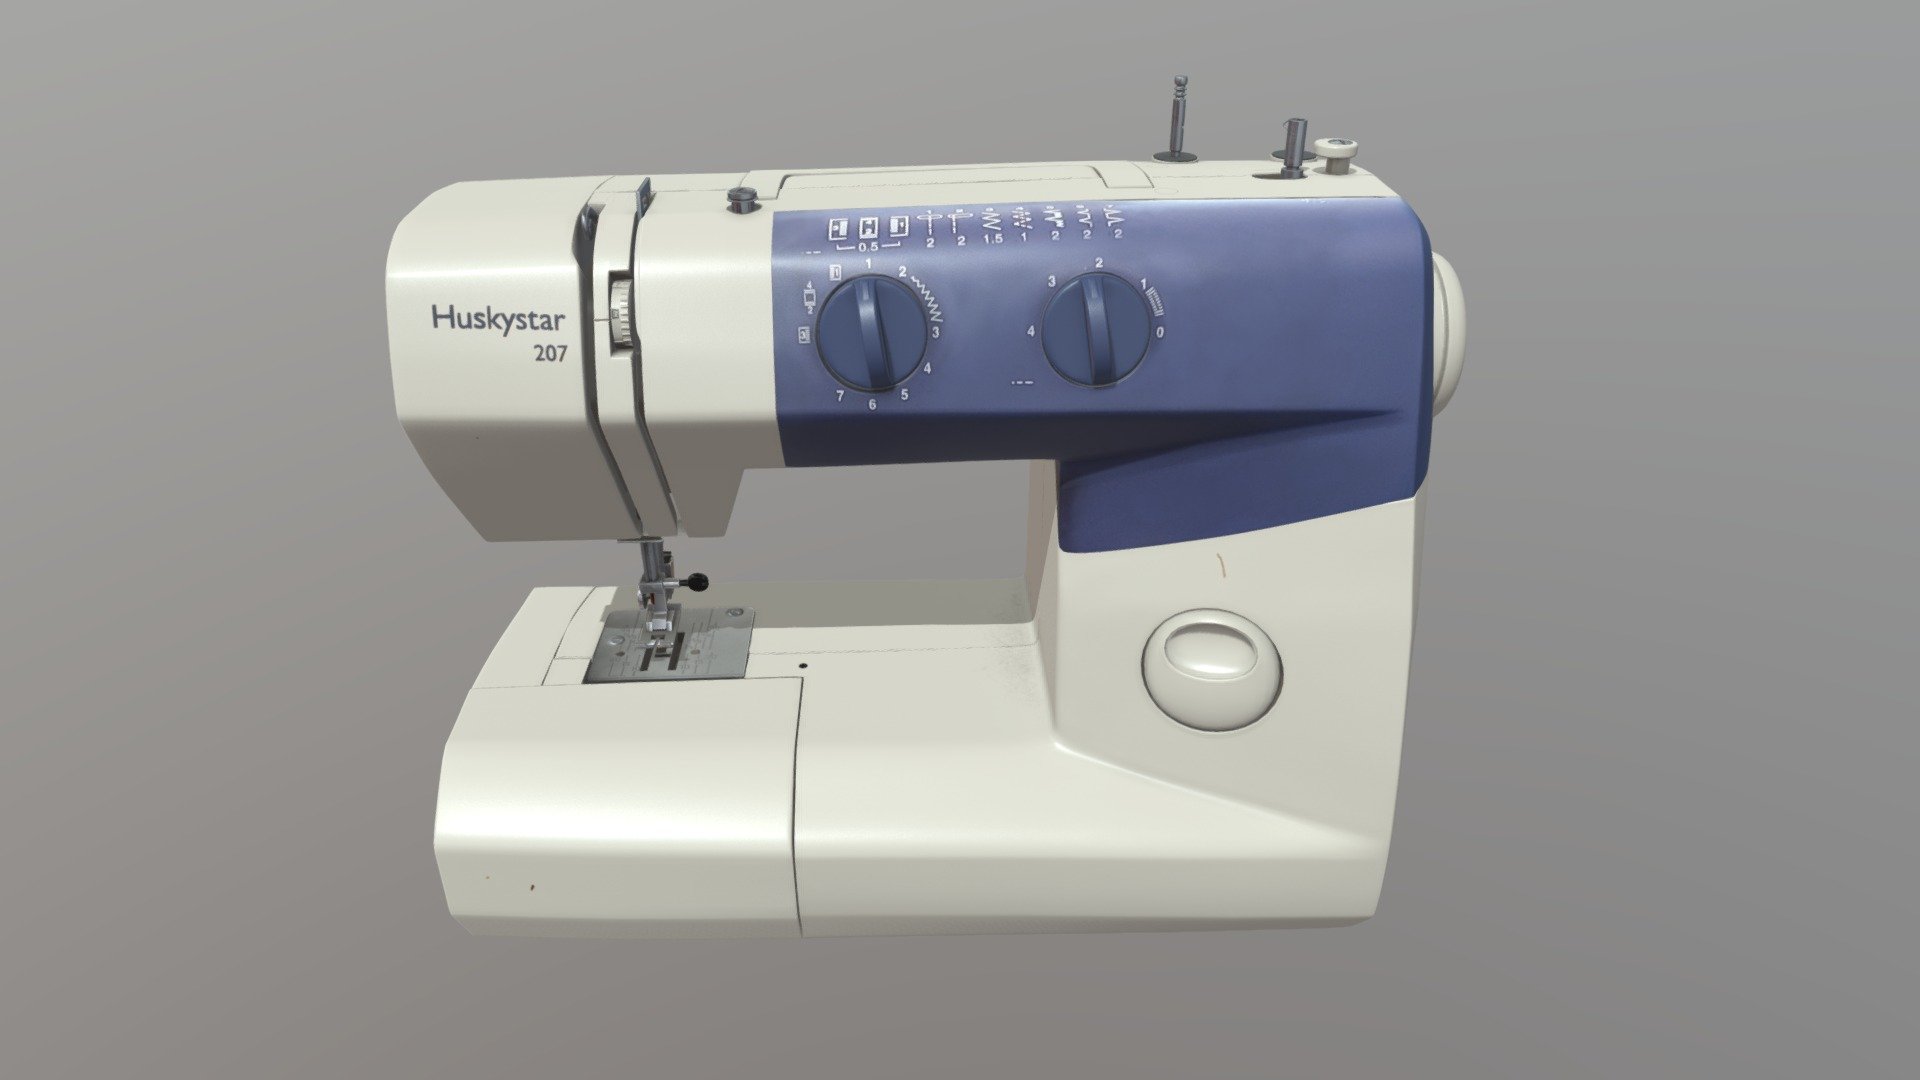 Sewing machine recreated from a rough photo scan used for synthetic AI training 3d model